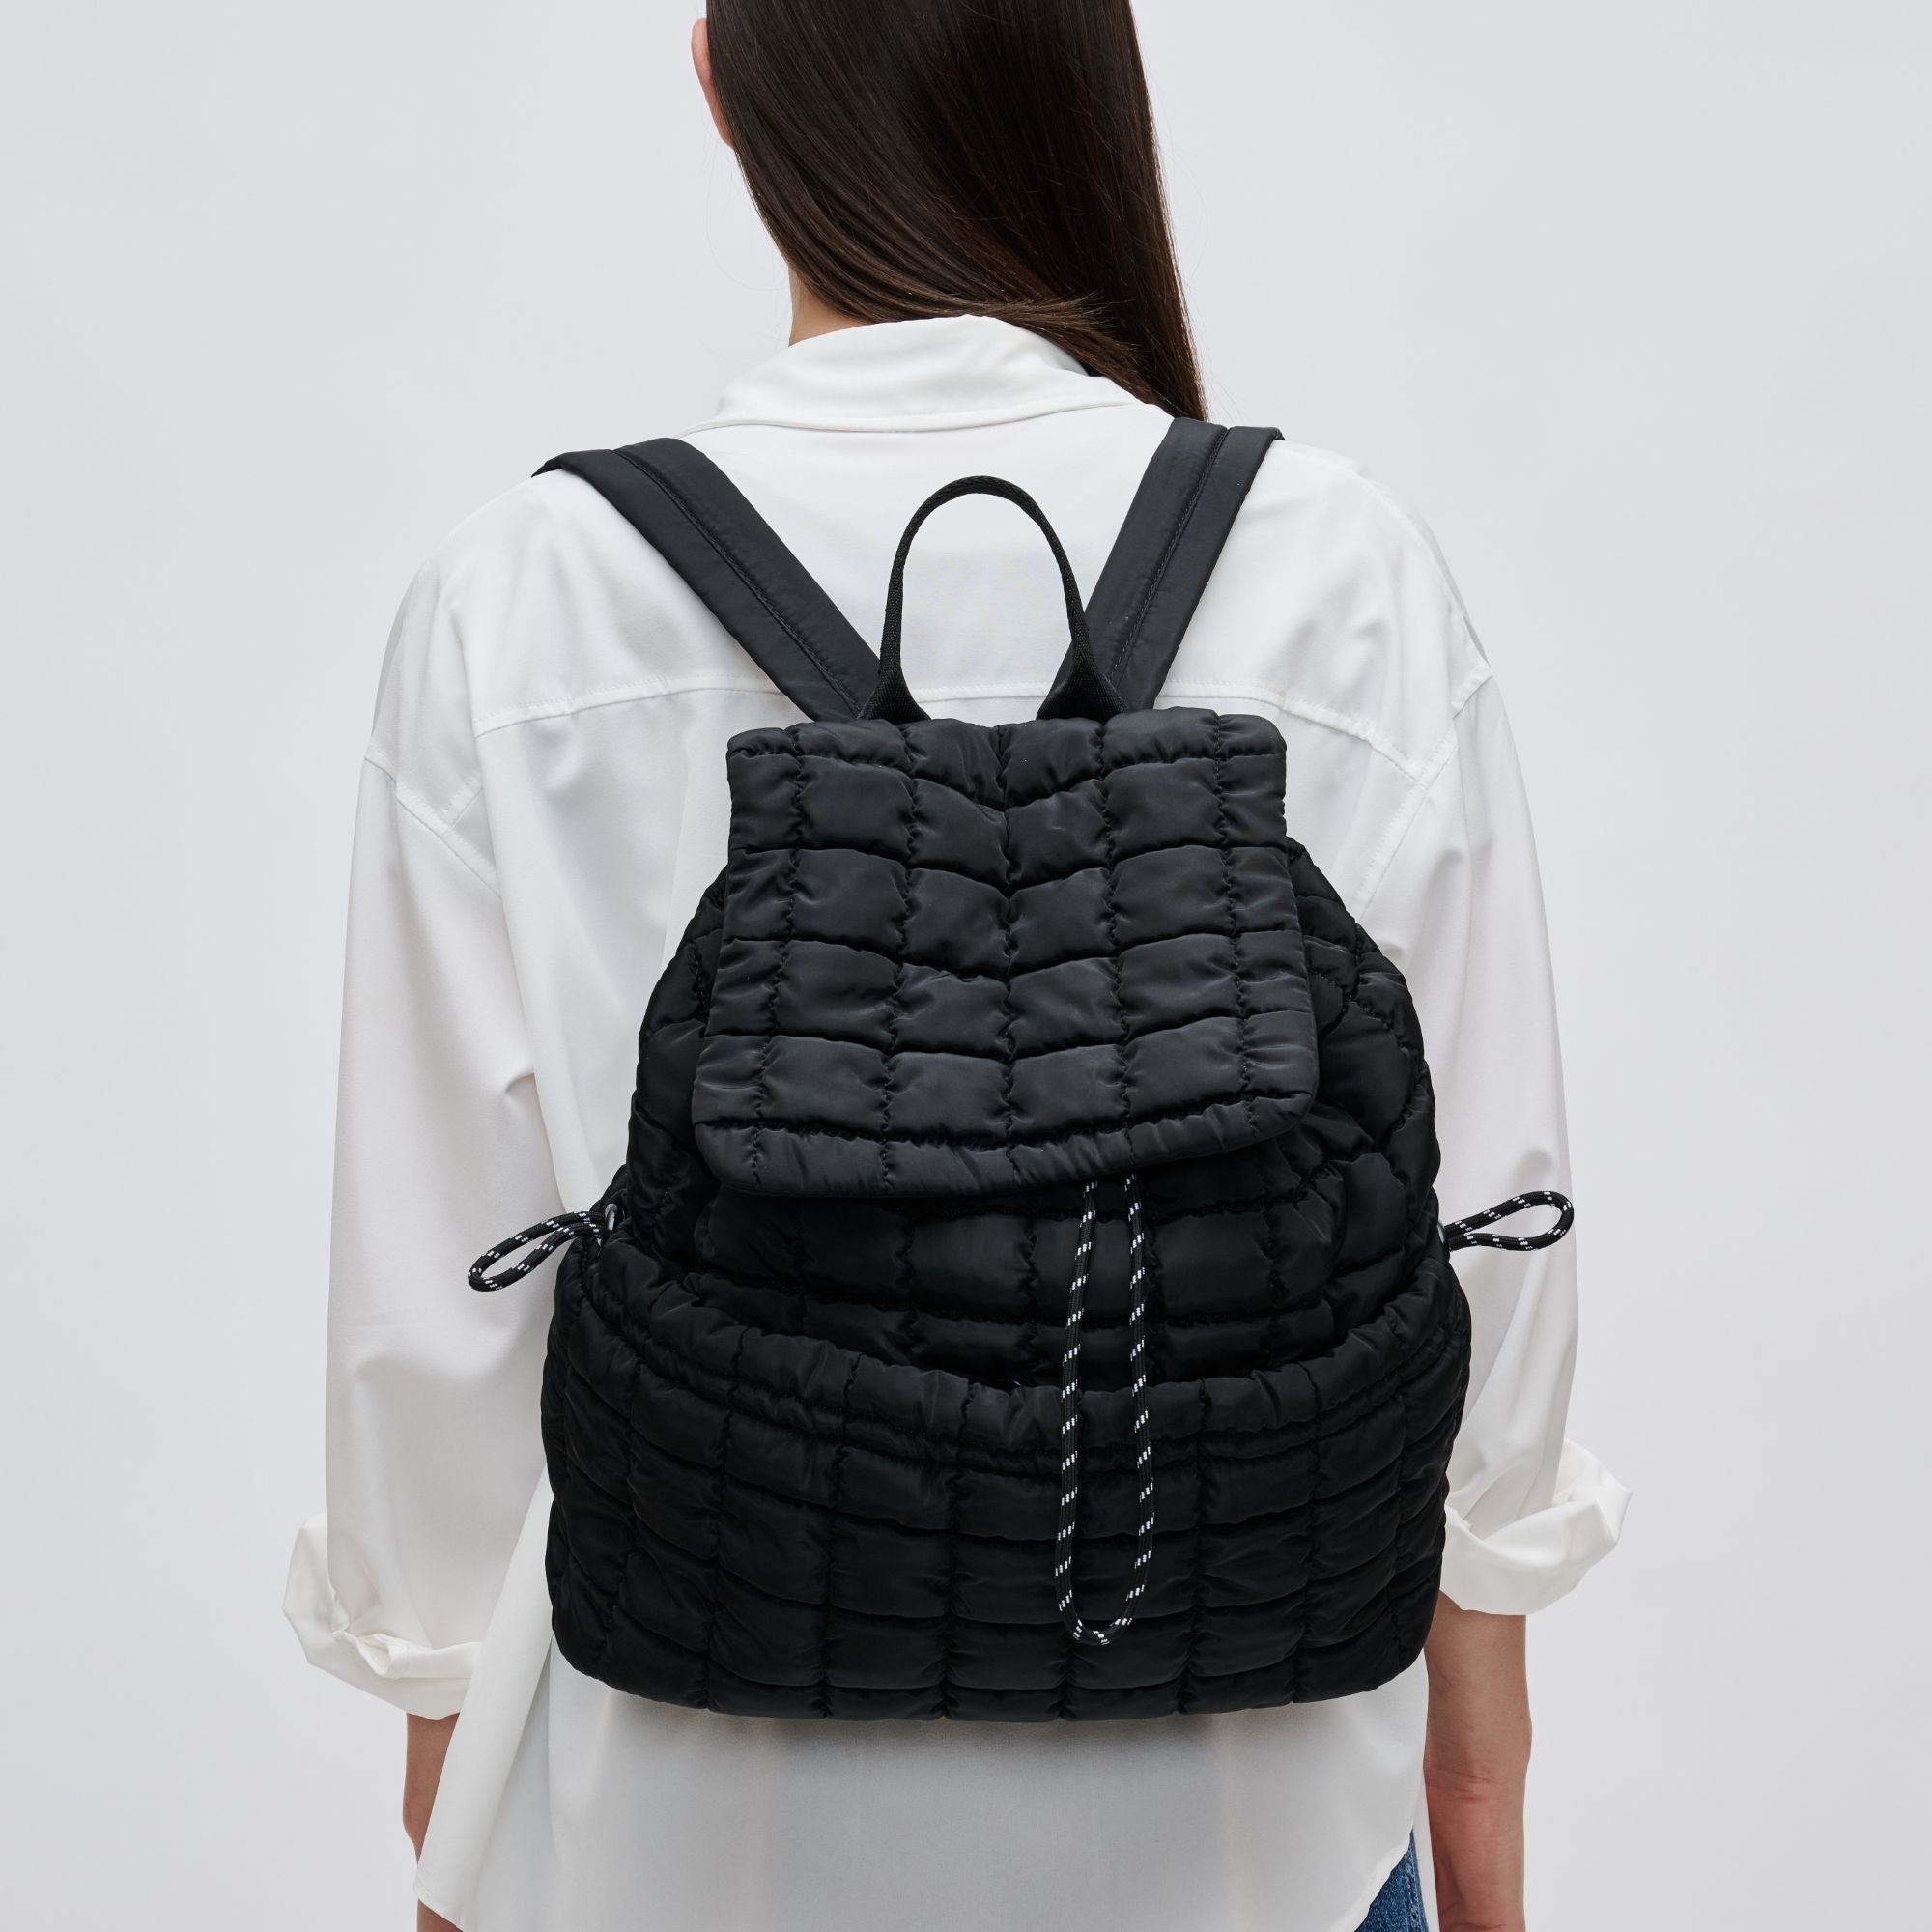 a model in white wearing a black puffer-style backpack